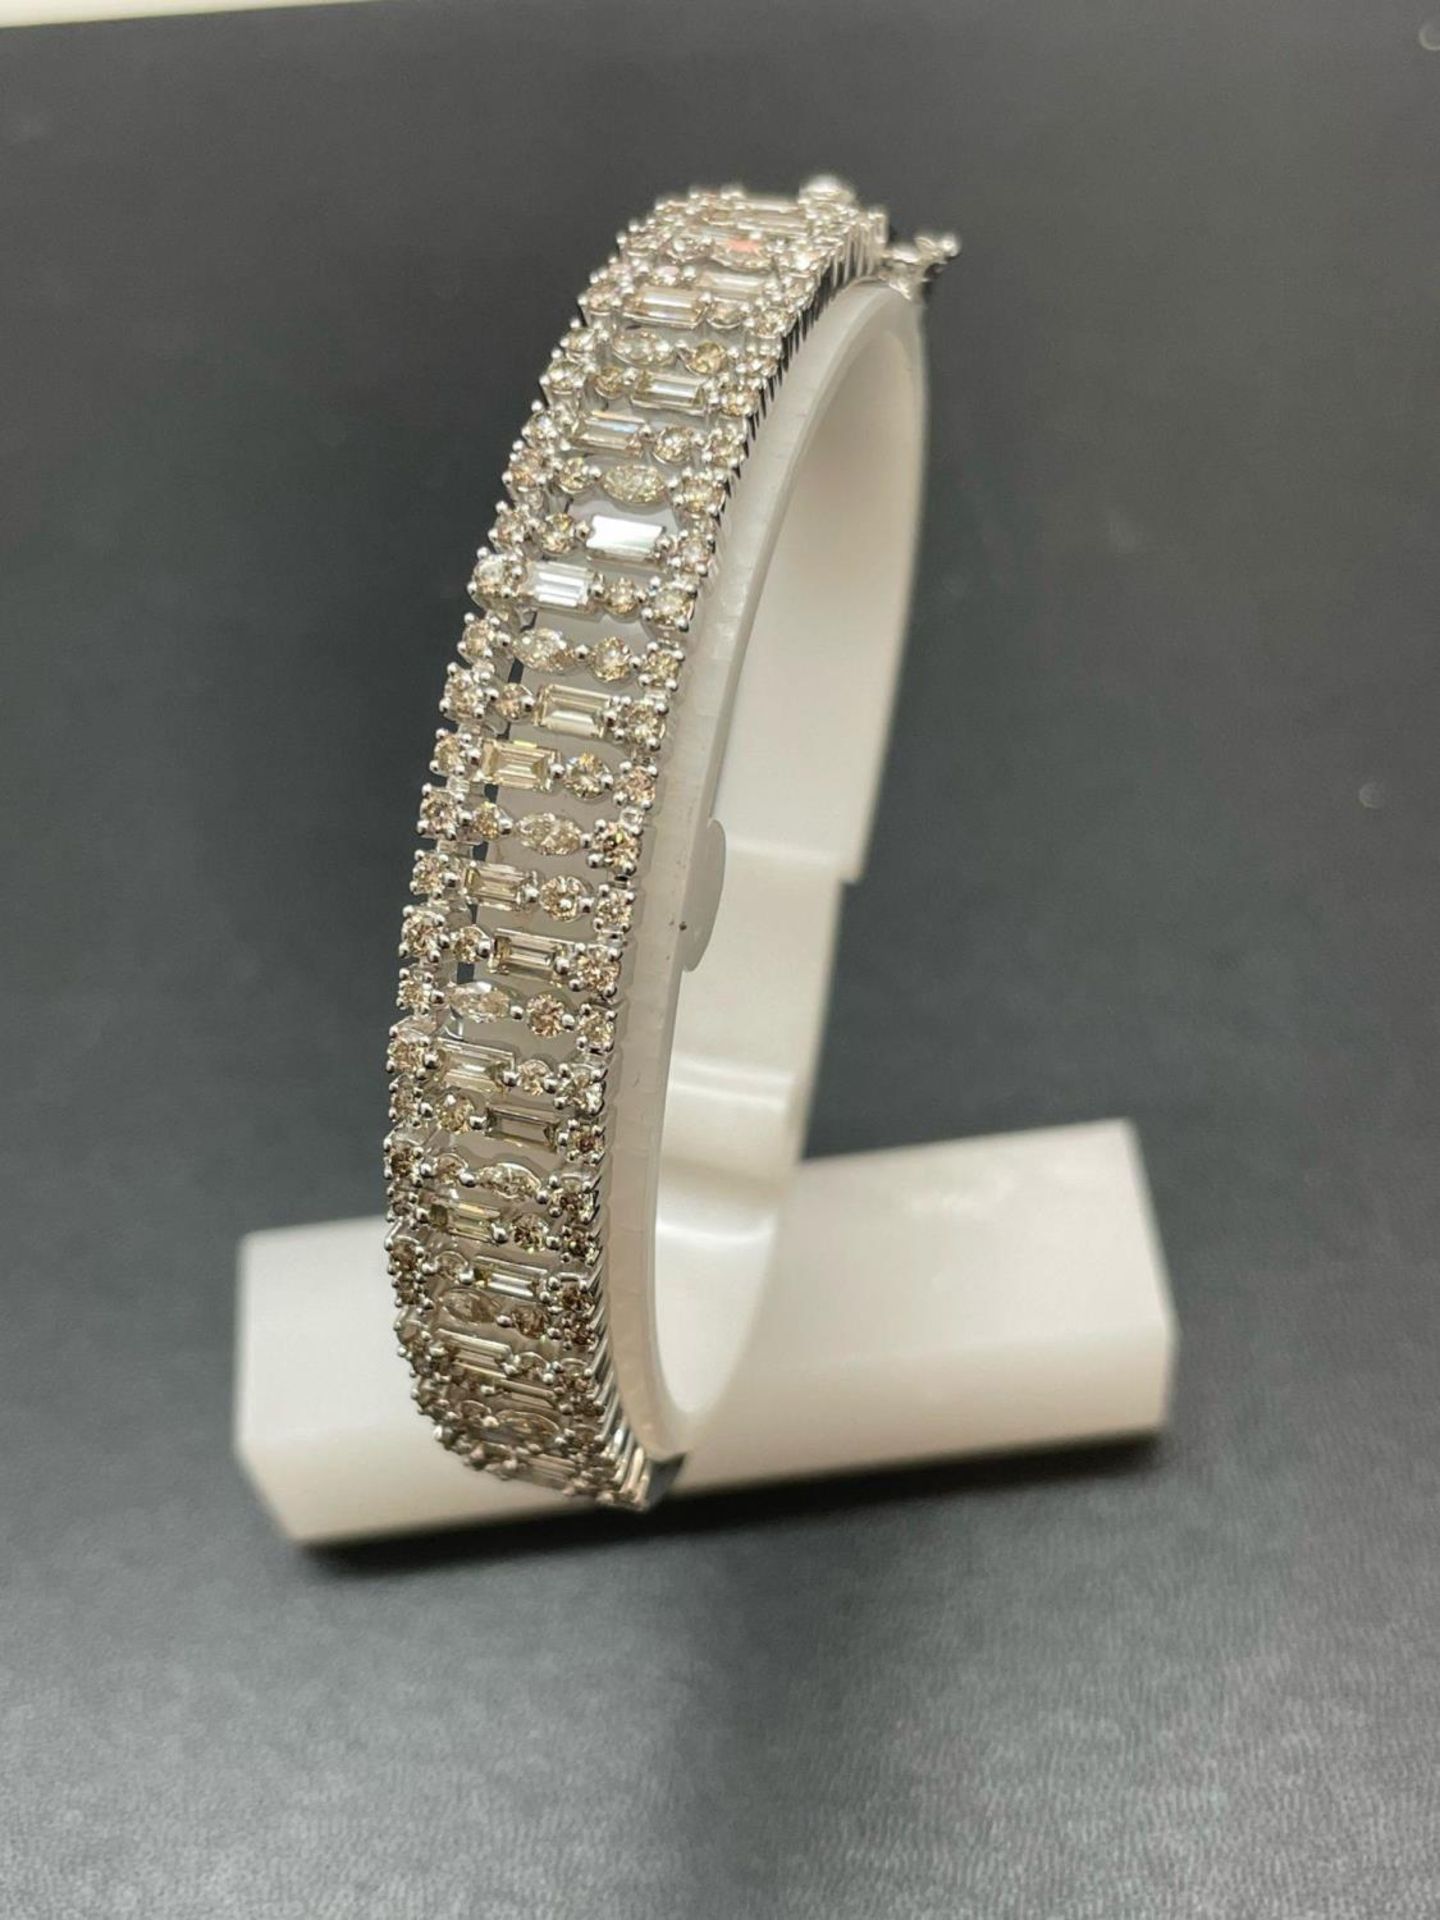 A NEW 9 CARAT WHITE GOLD HINGED BANGLE, SET WITH BRILLIANT AND BAGUETTE CUT DIAMONDS OF TOTAL WEIGHT